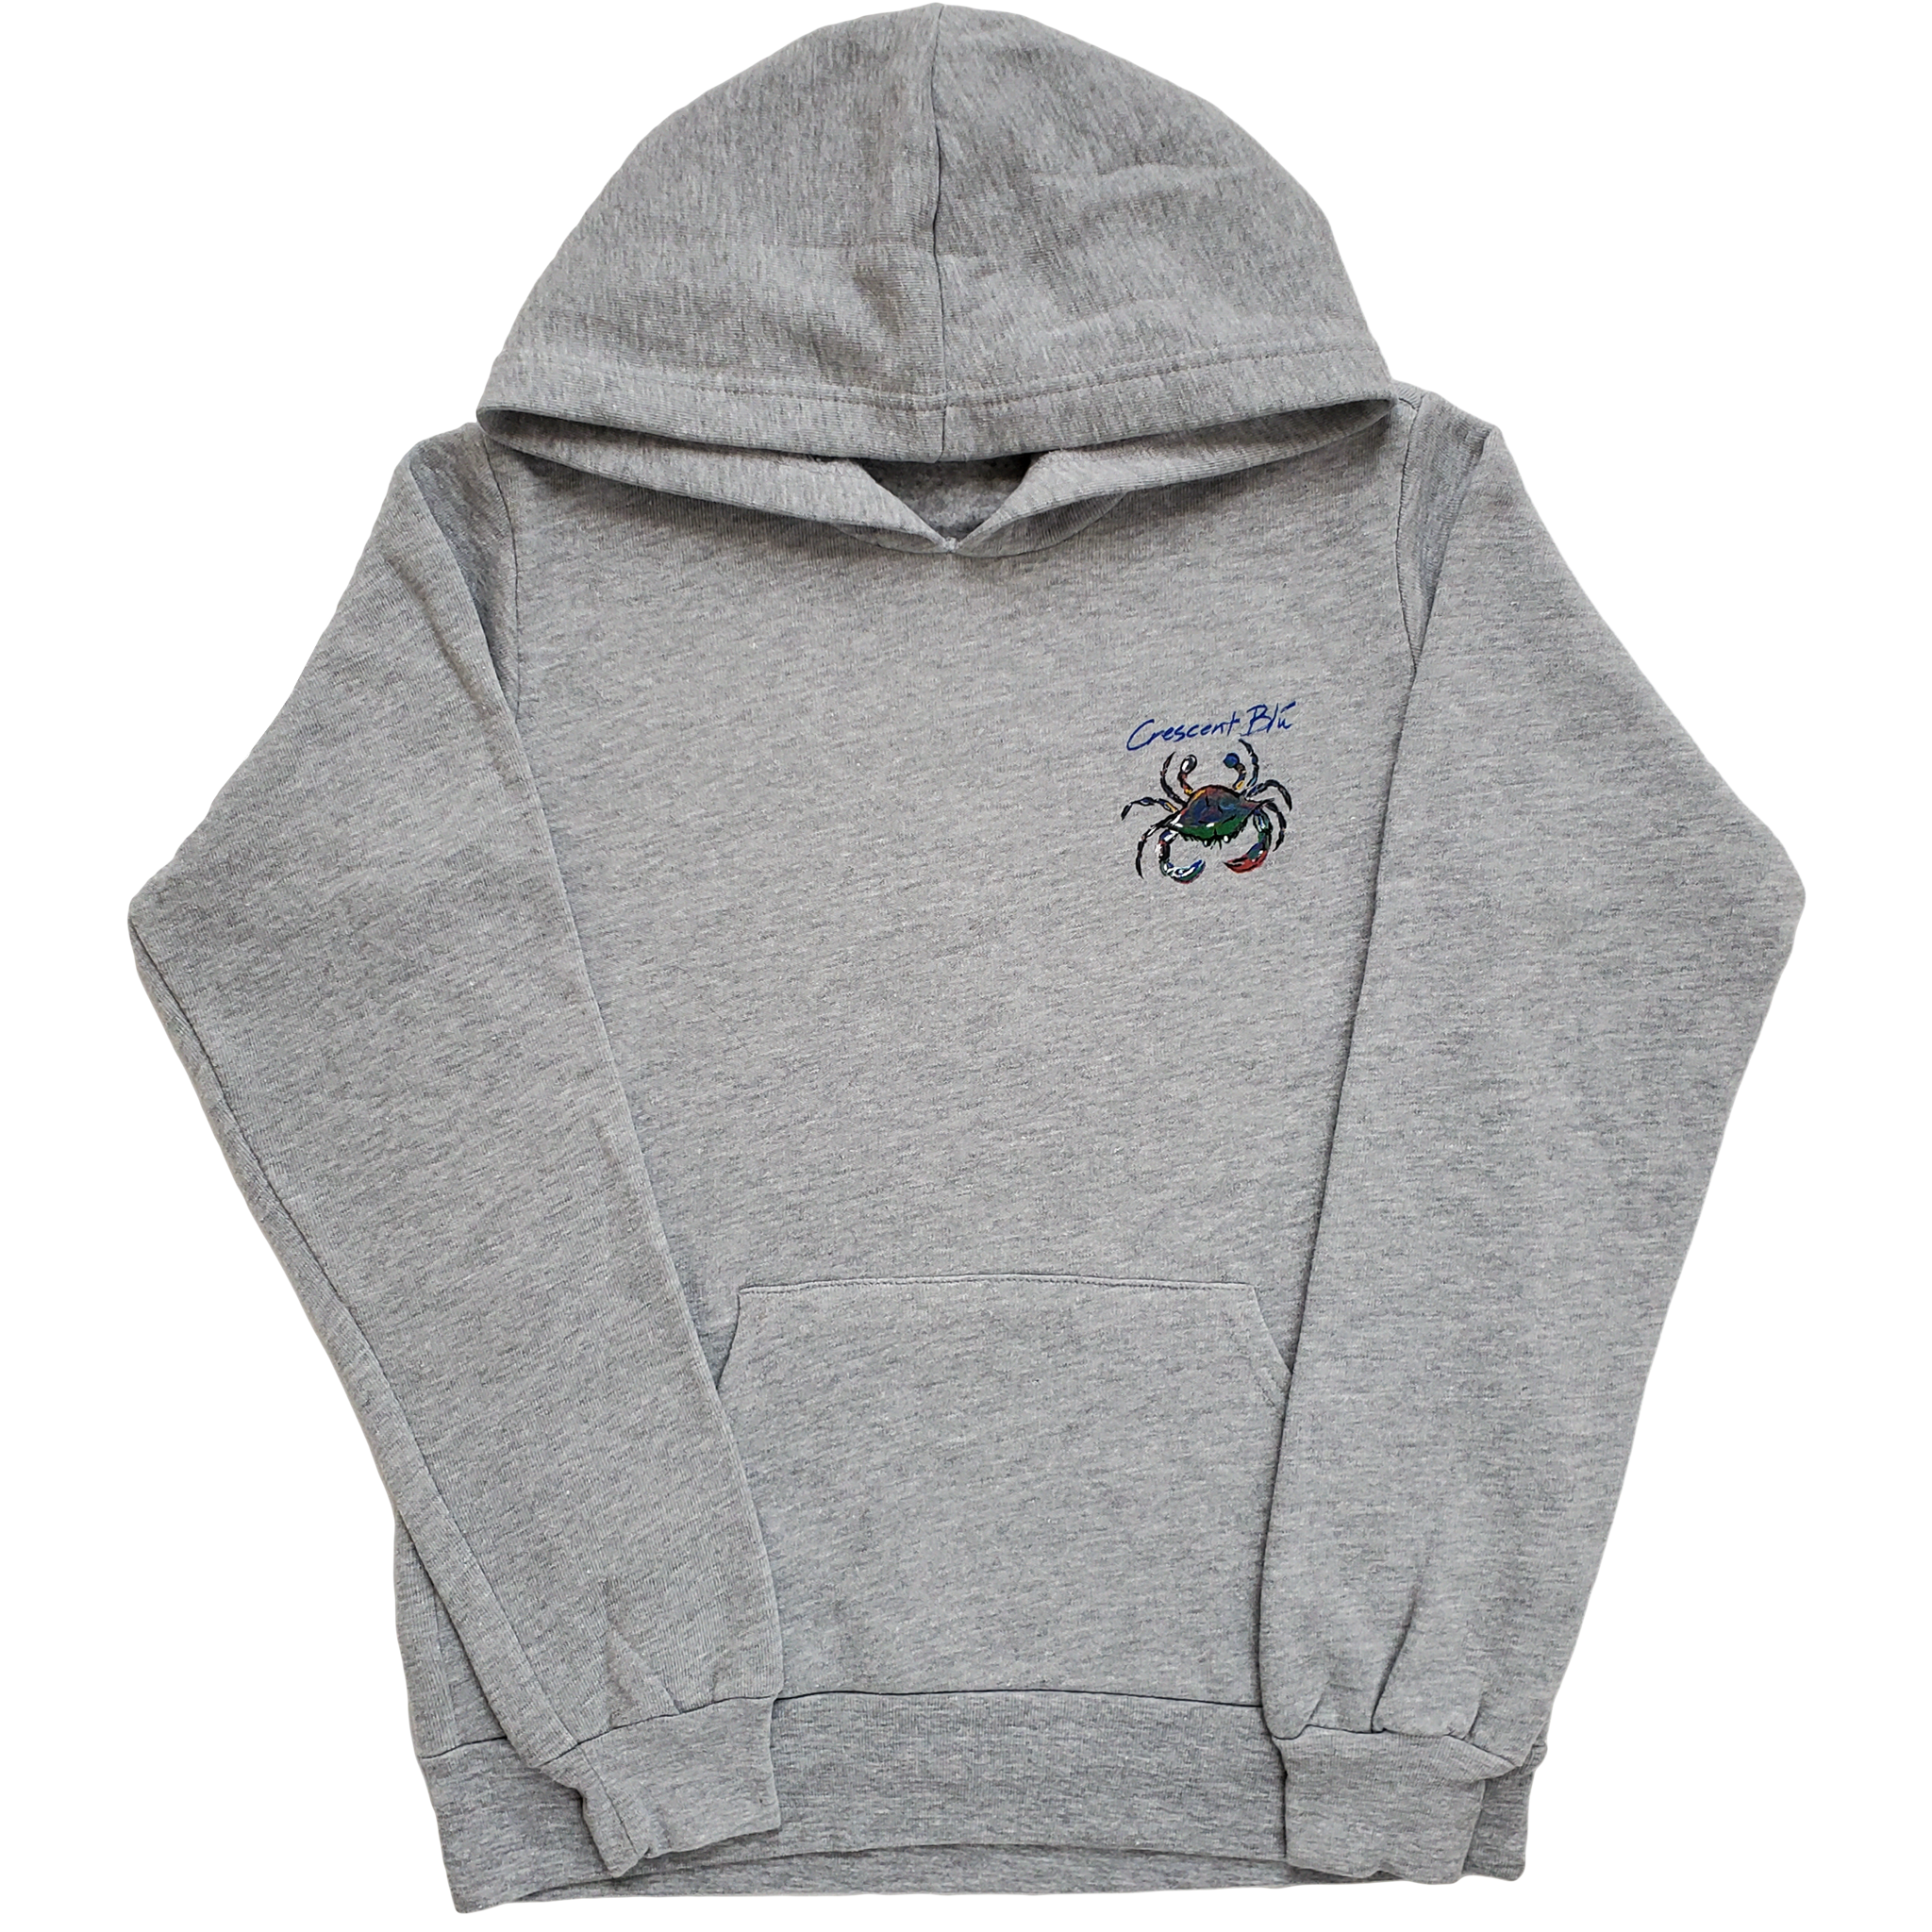 View of front of adult sweatshirt hoodie in Athletic Grey color with multicolored Crescent Blu crab logo printed on the upper left chest